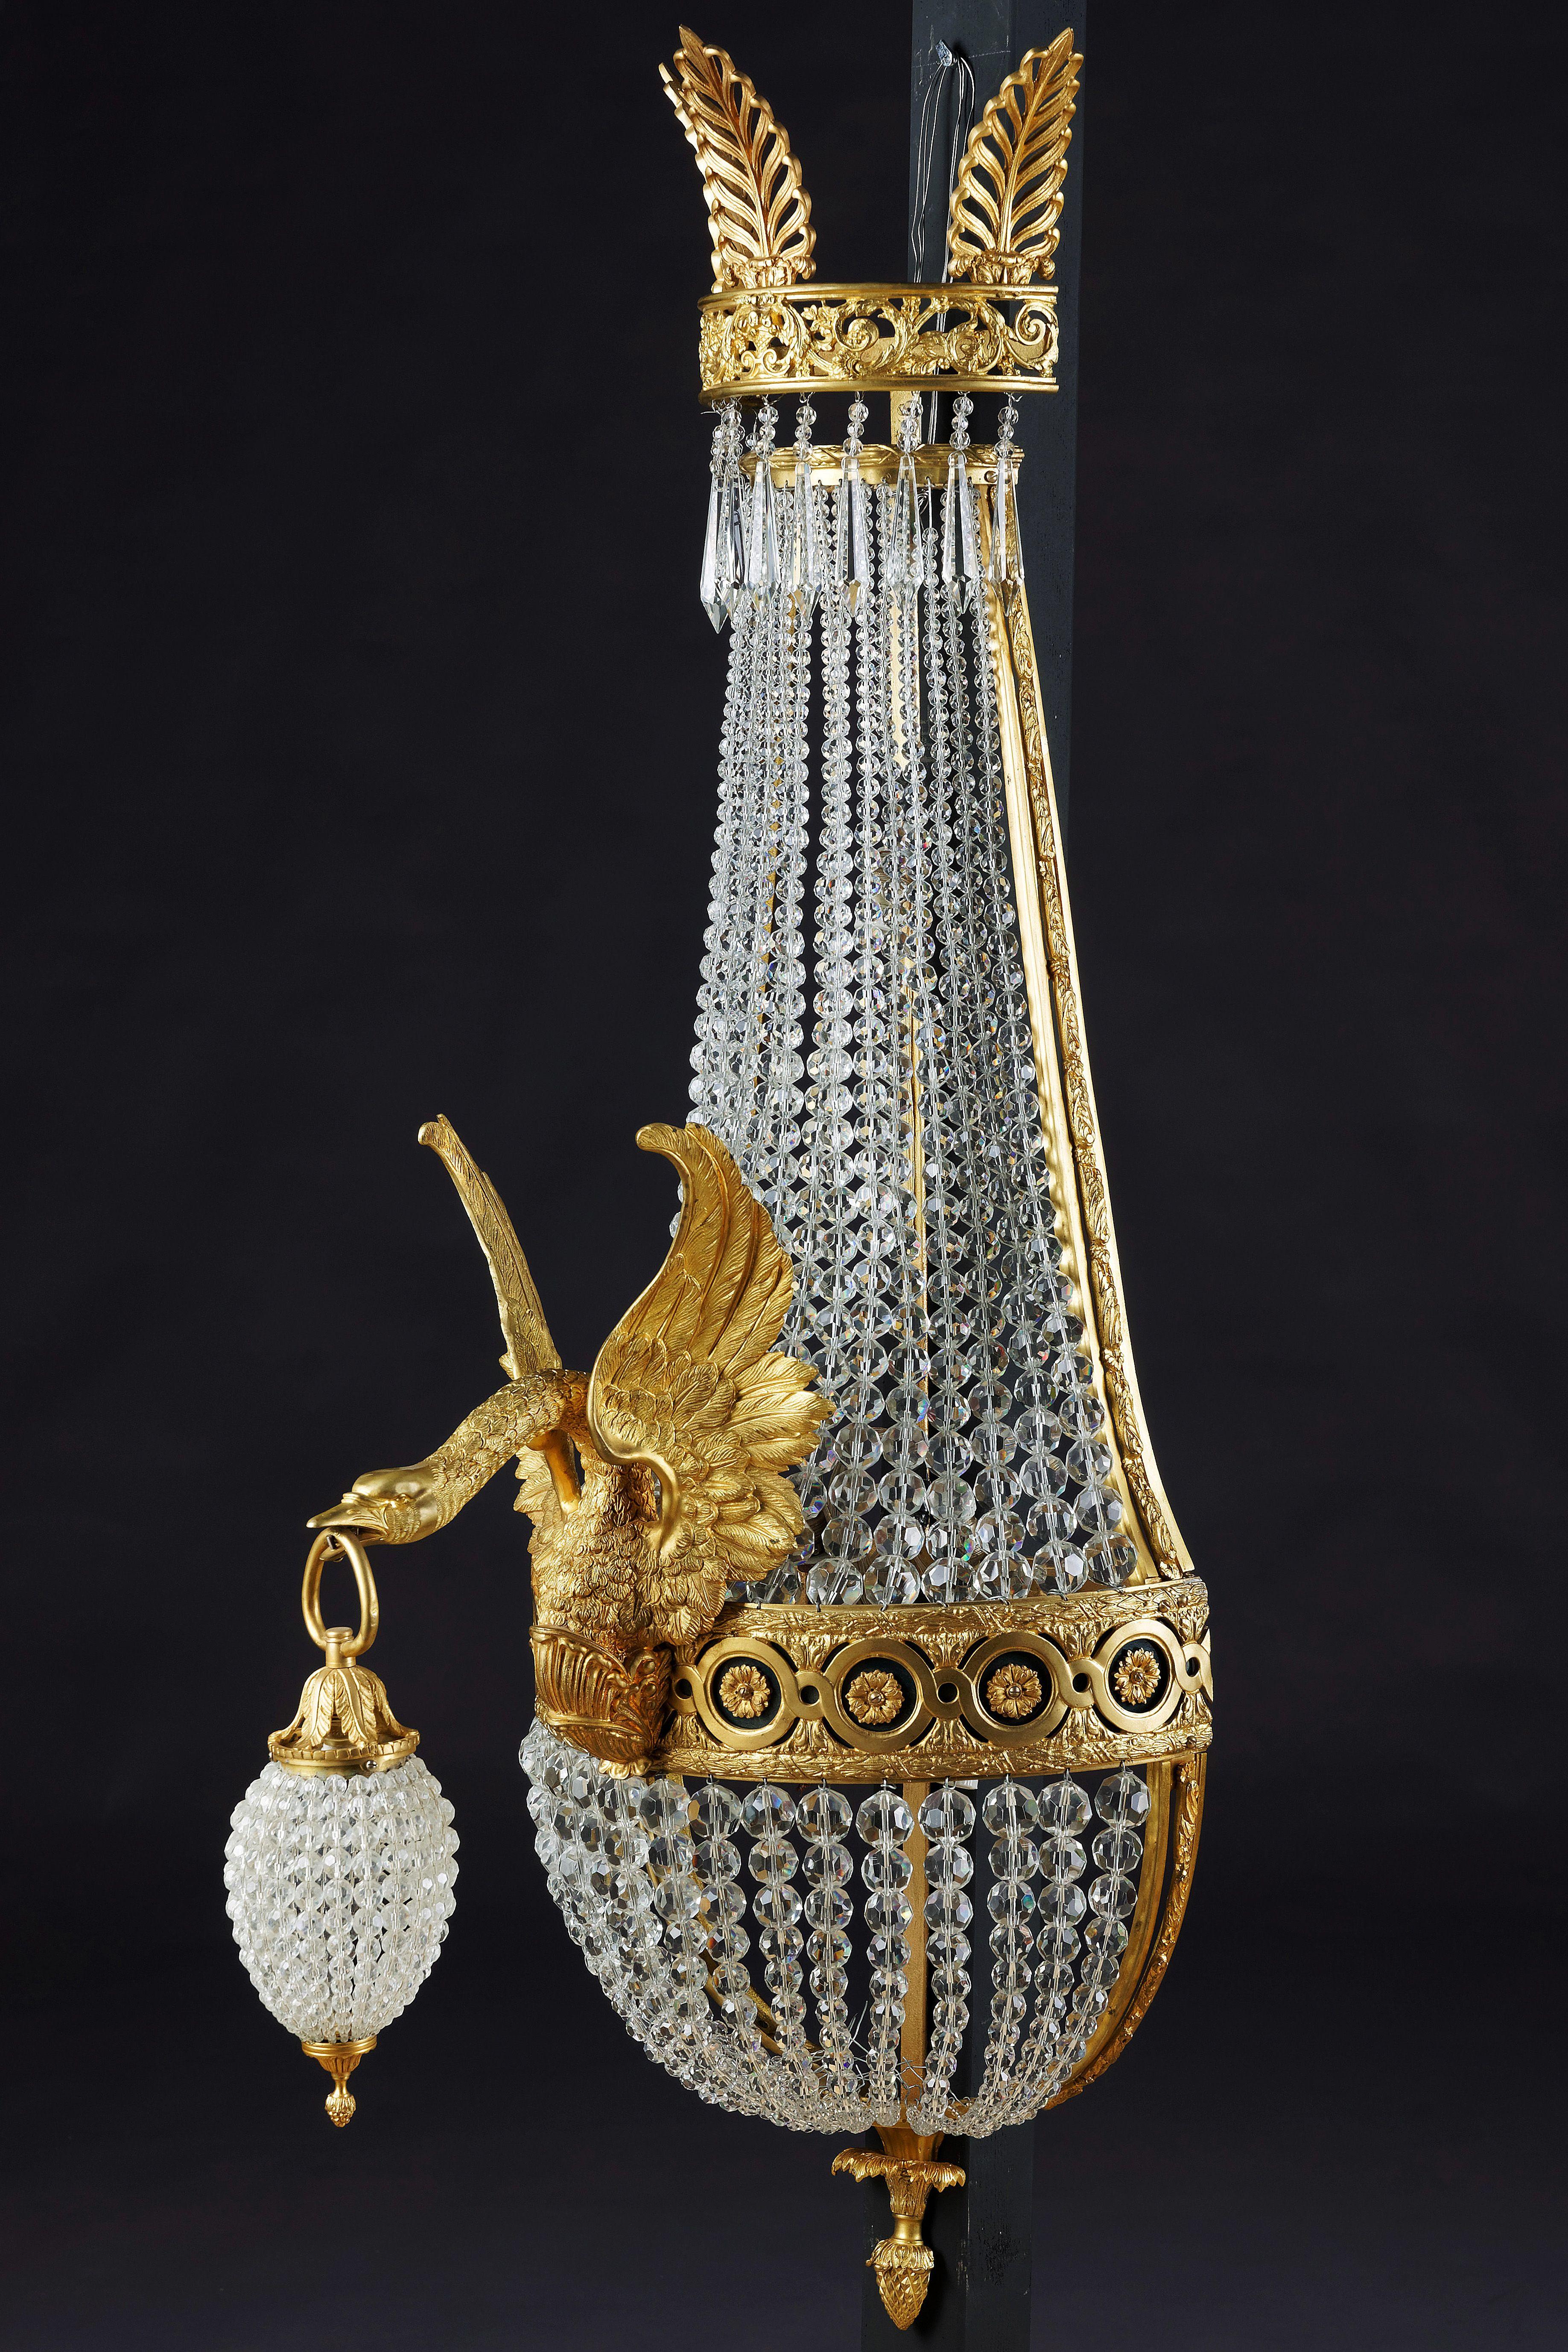 Majestic basket wall light in Empire style.
Exceptionally fine engraved and cast bronze. Basket-formed corpus,connected through wide, ornamental reliefed and broken hoop. There from, one fully moulded swan-designed light arms. Electrified. In beak,